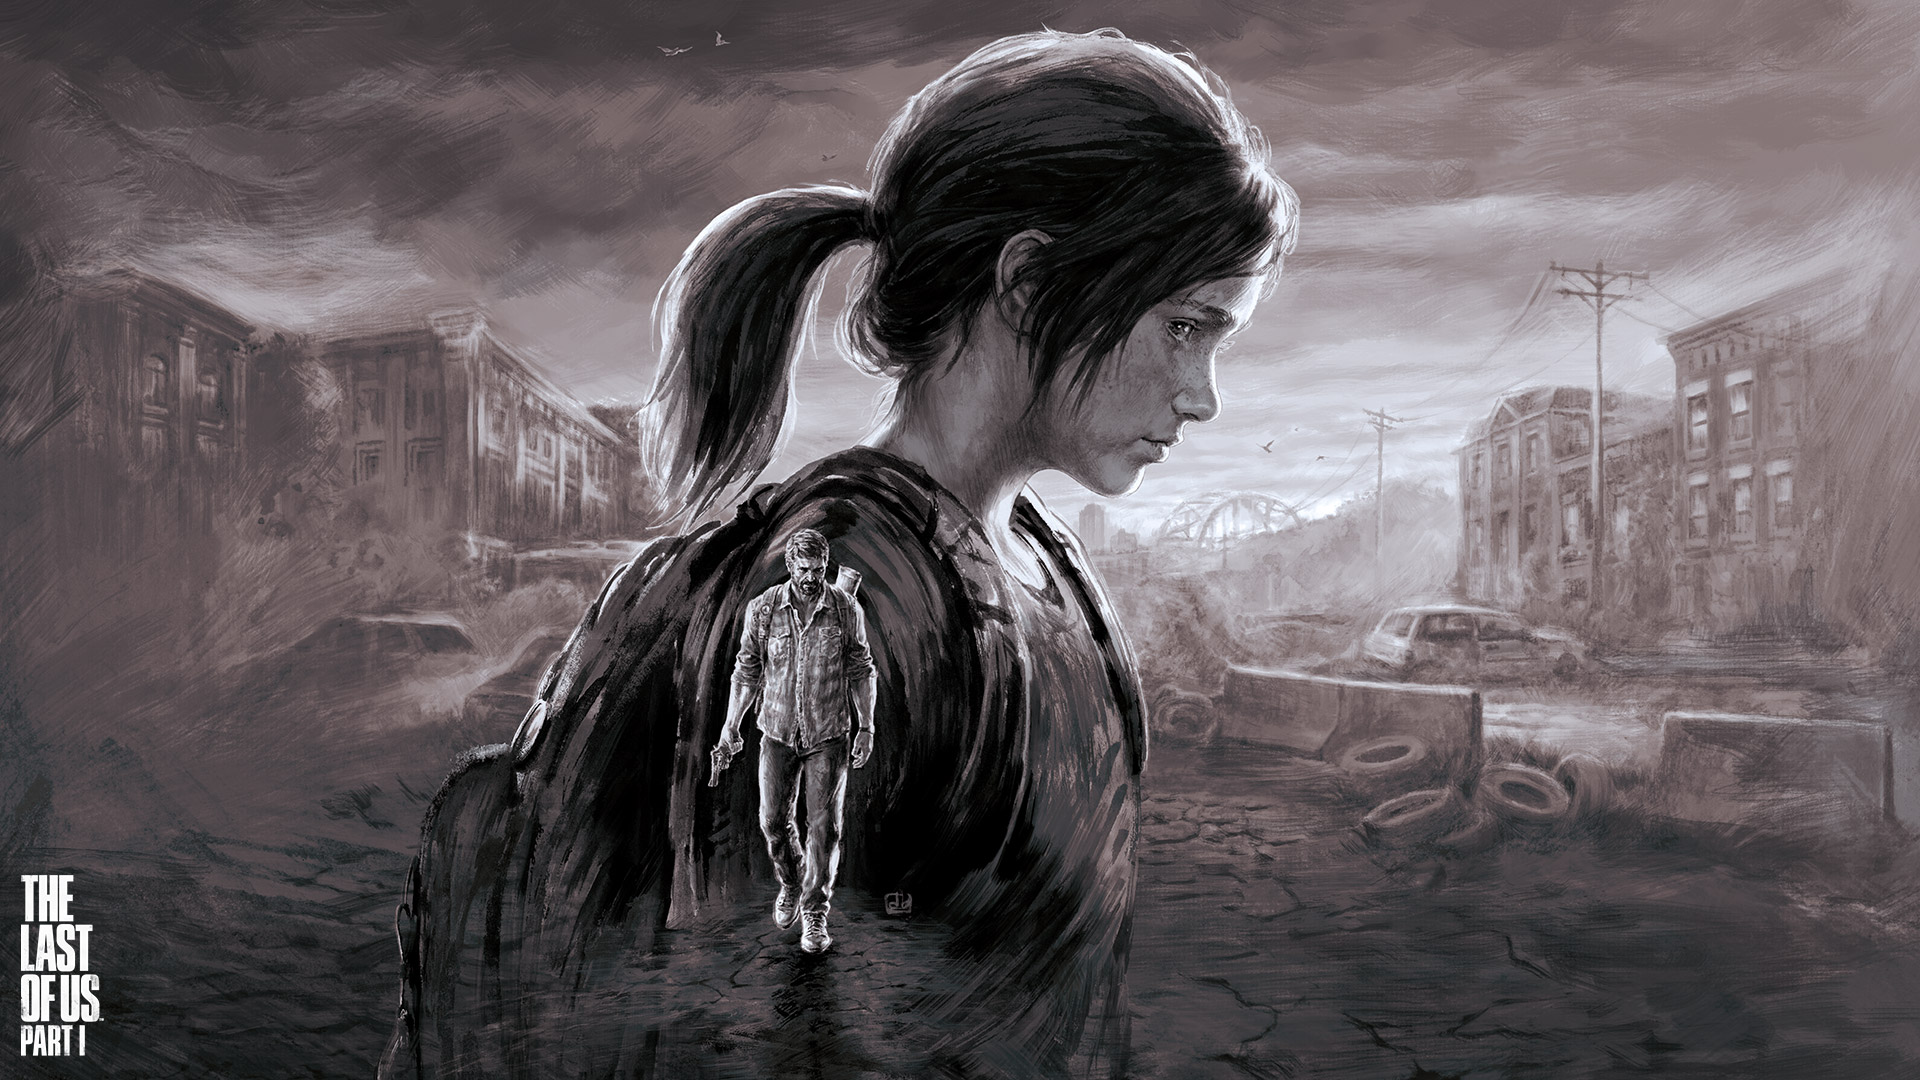 THE LAST OF US PART 2, WALLPAPER